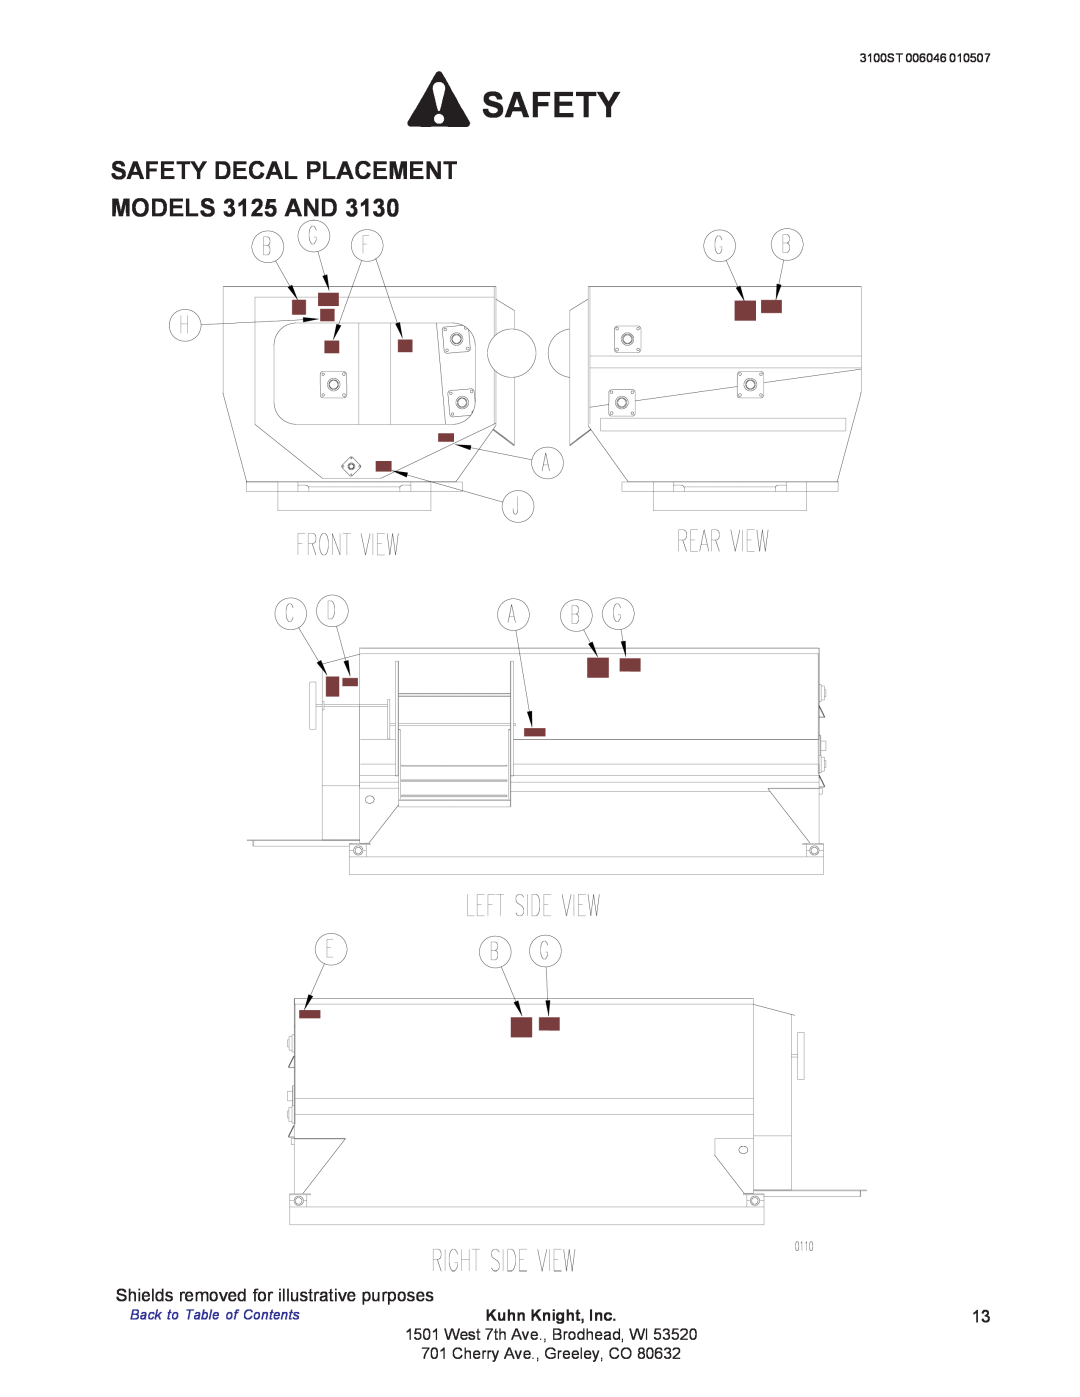 Kuhn Rikon 3100 SAFETY DECAL PLACEMENT MODELS 3125 AND, Safety, Shields removed for illustrative purposes 